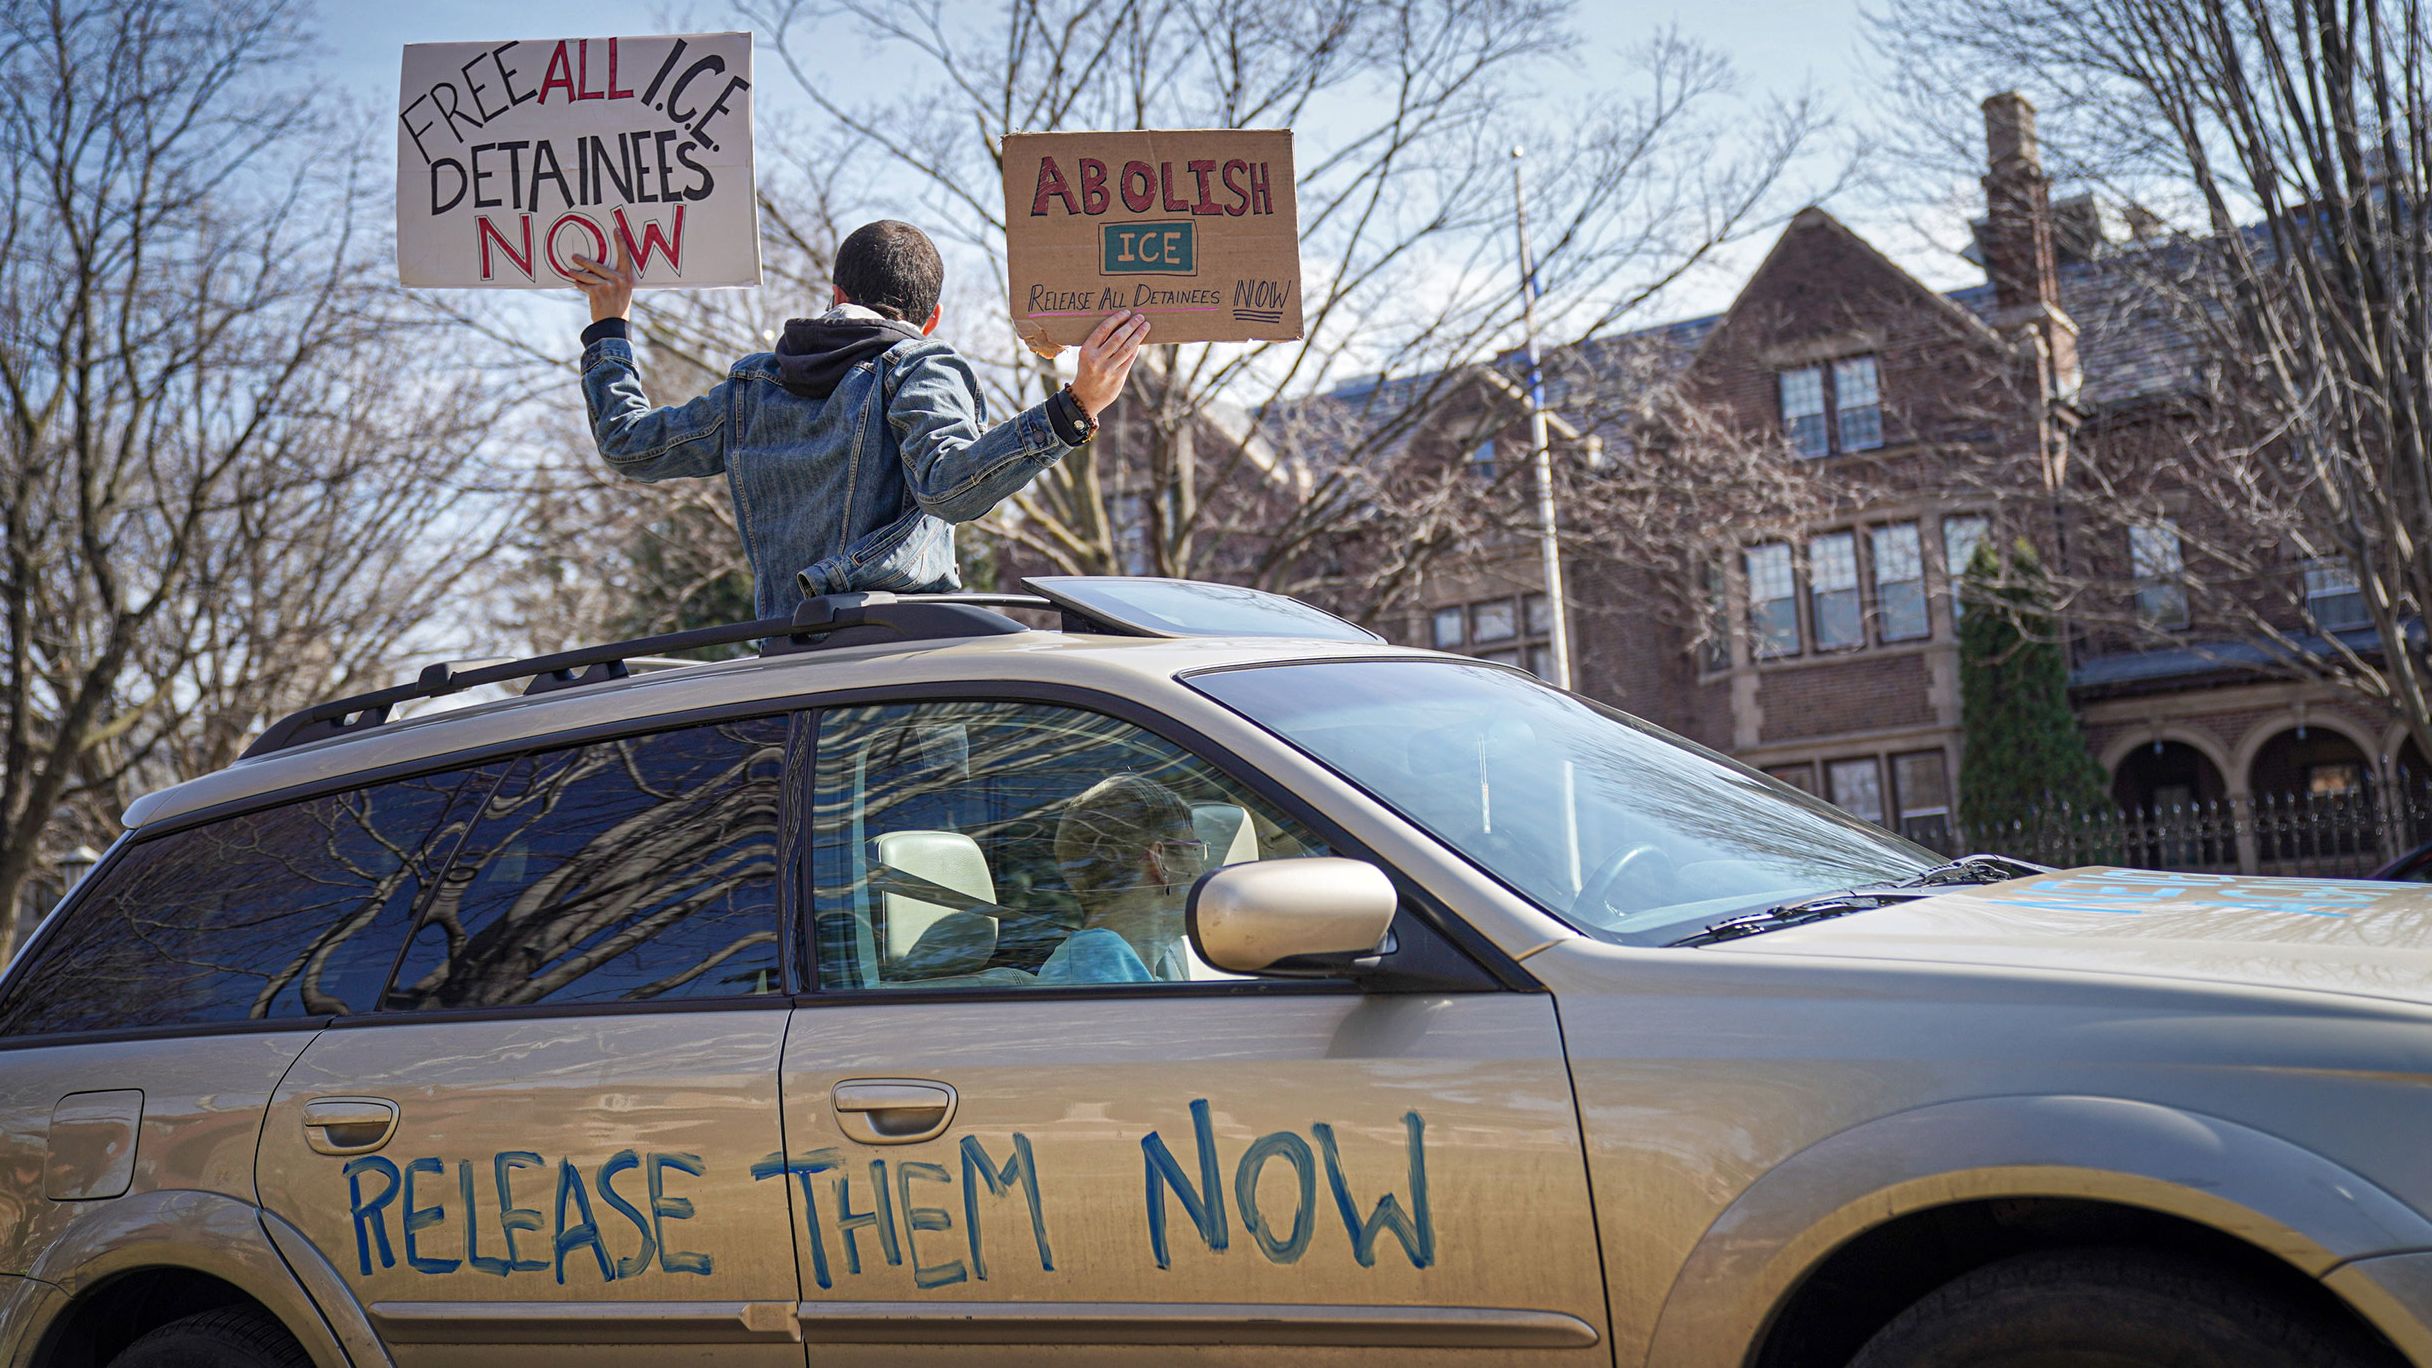 Activists who stayed mostly in their cars for social distancing honked horns outside the Governor's Residence in St. Paul, Minnesota, on March 27.